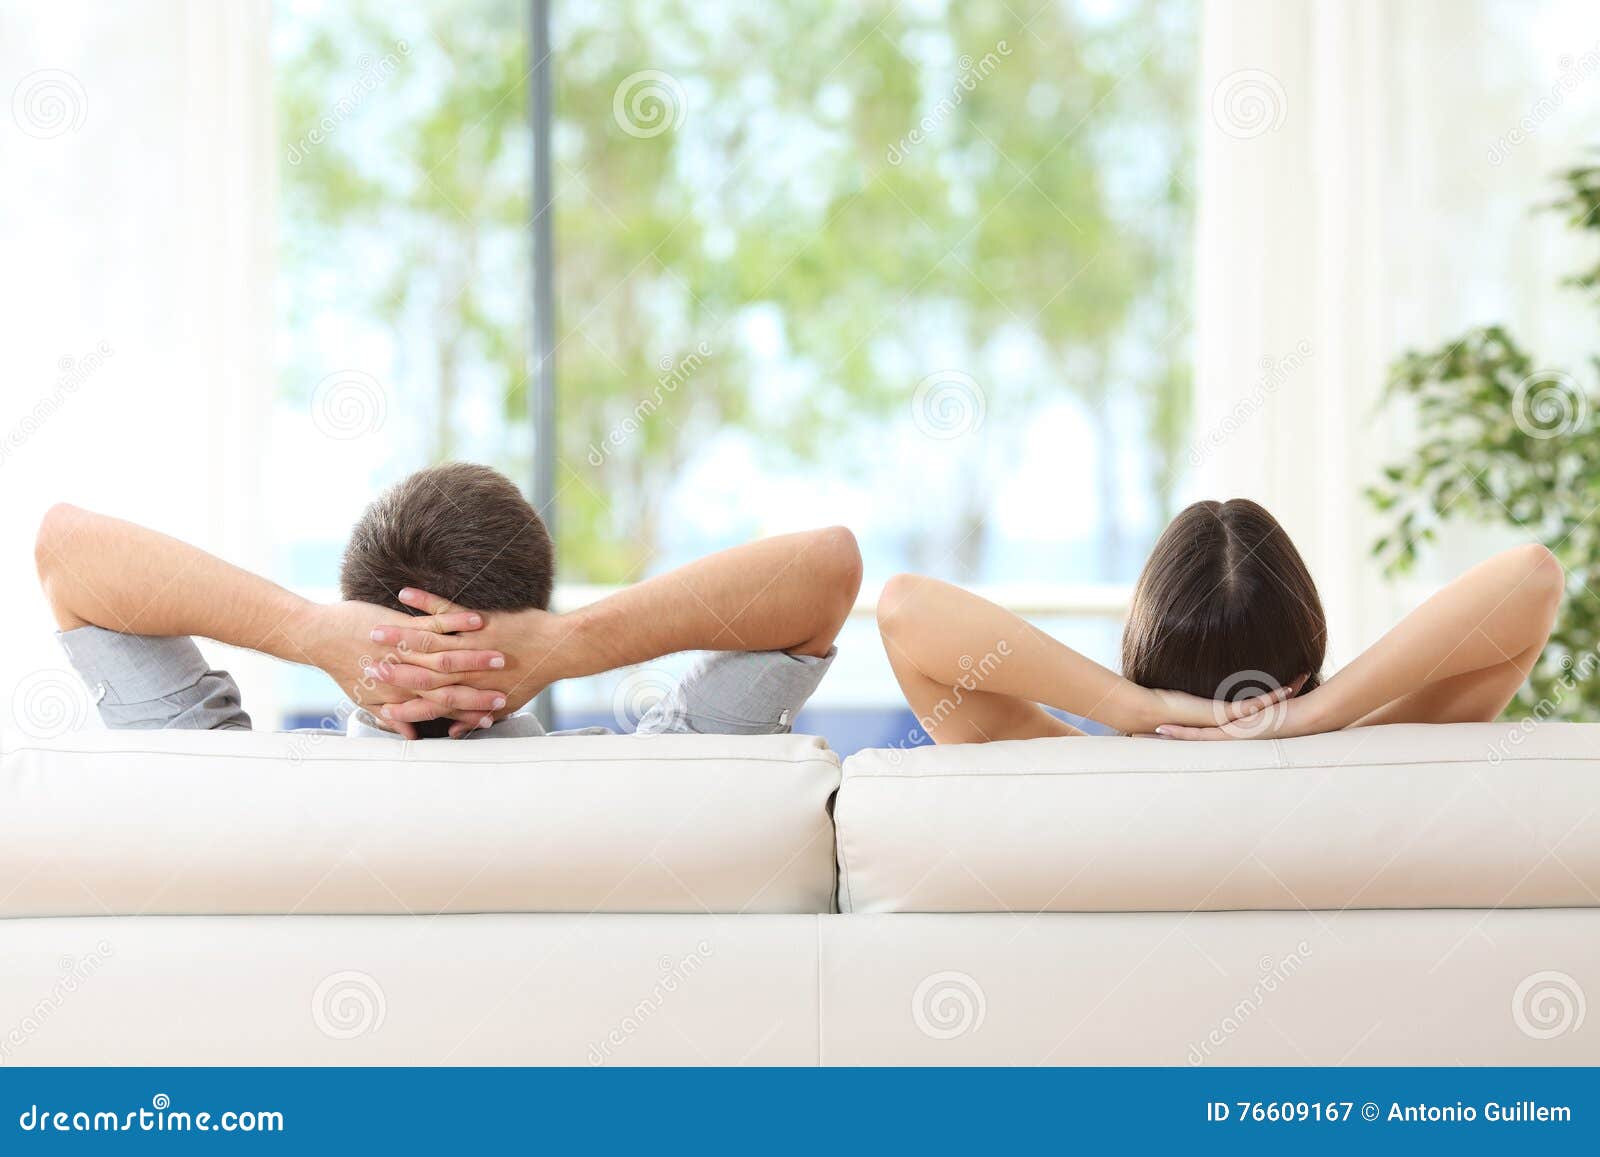 couple relaxing on a couch at home